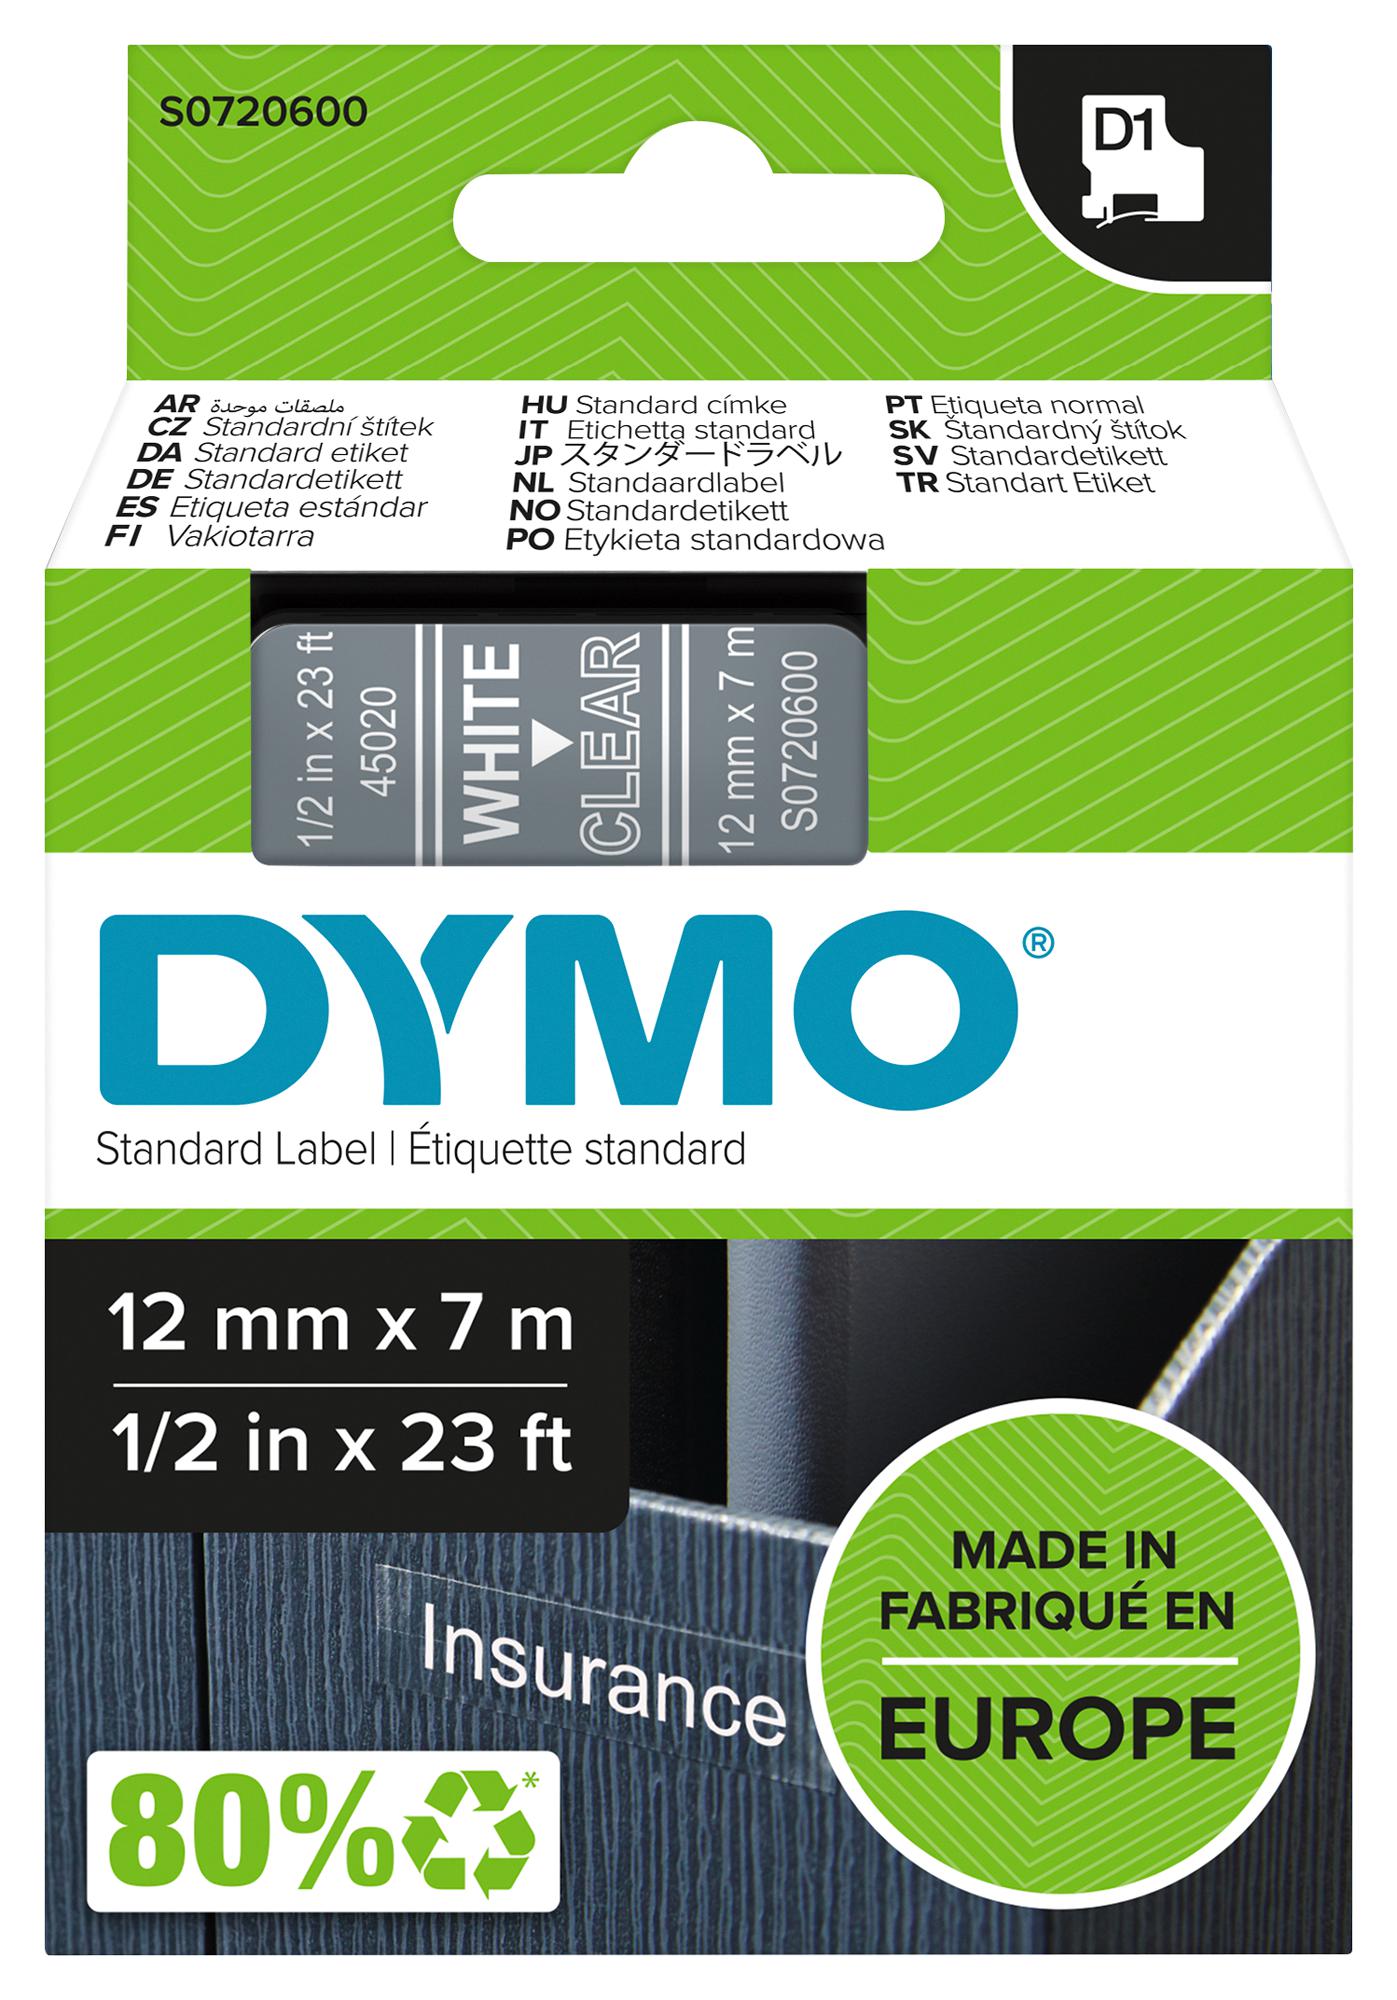 Dymo 45020 Tape, White/clear, 12mm